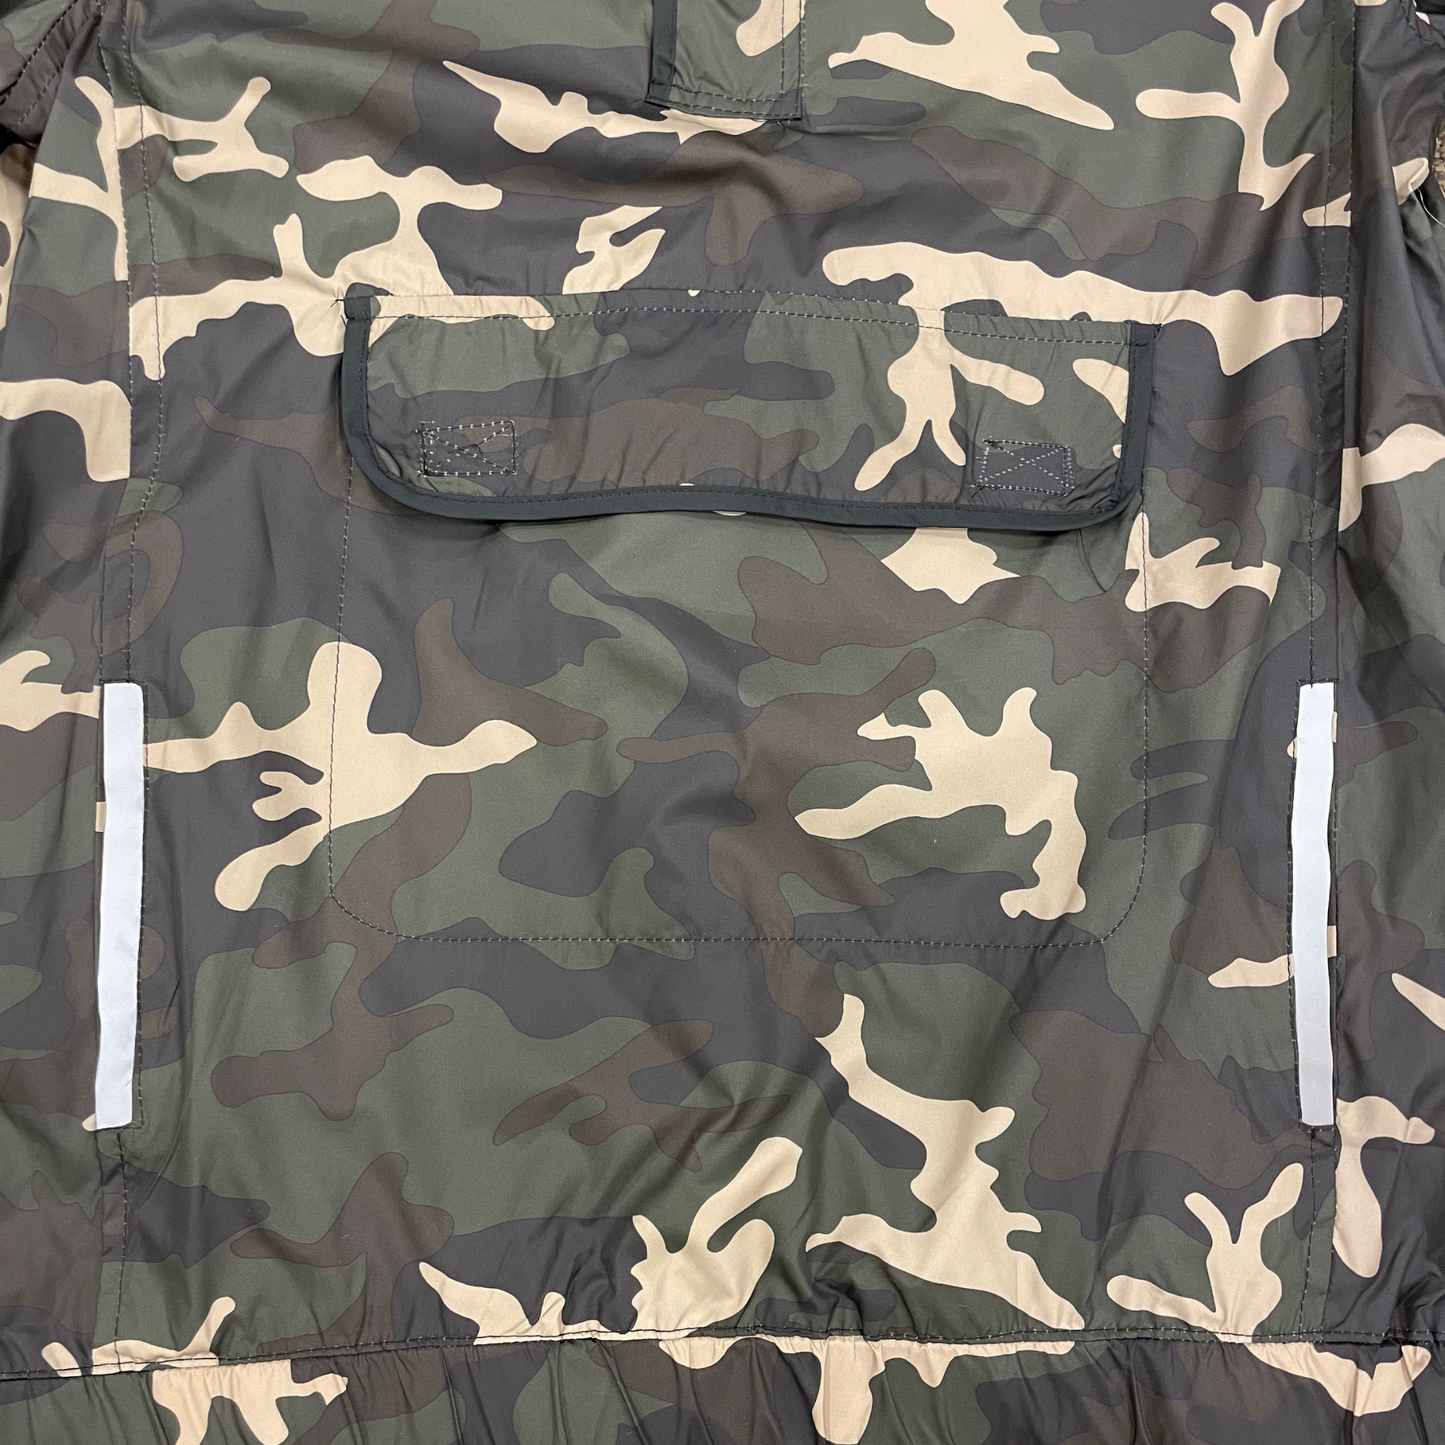 2 in One! Bomber Jacket / Hoodie (Black or Camo S-2XL)